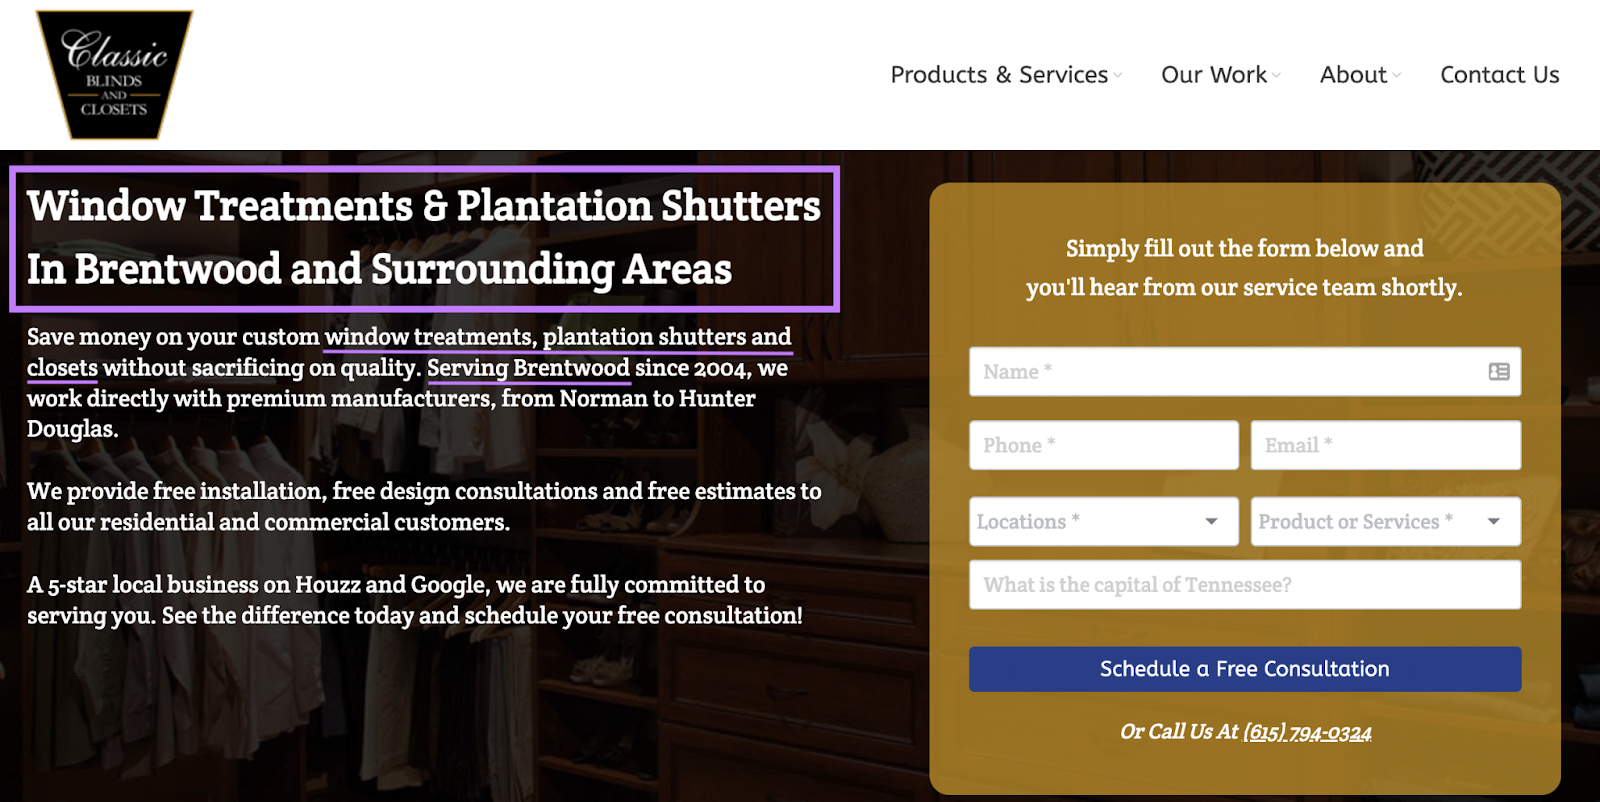 "Window Treatments & Plantation Shutters In Brentwood and Surrounding Area" landing page